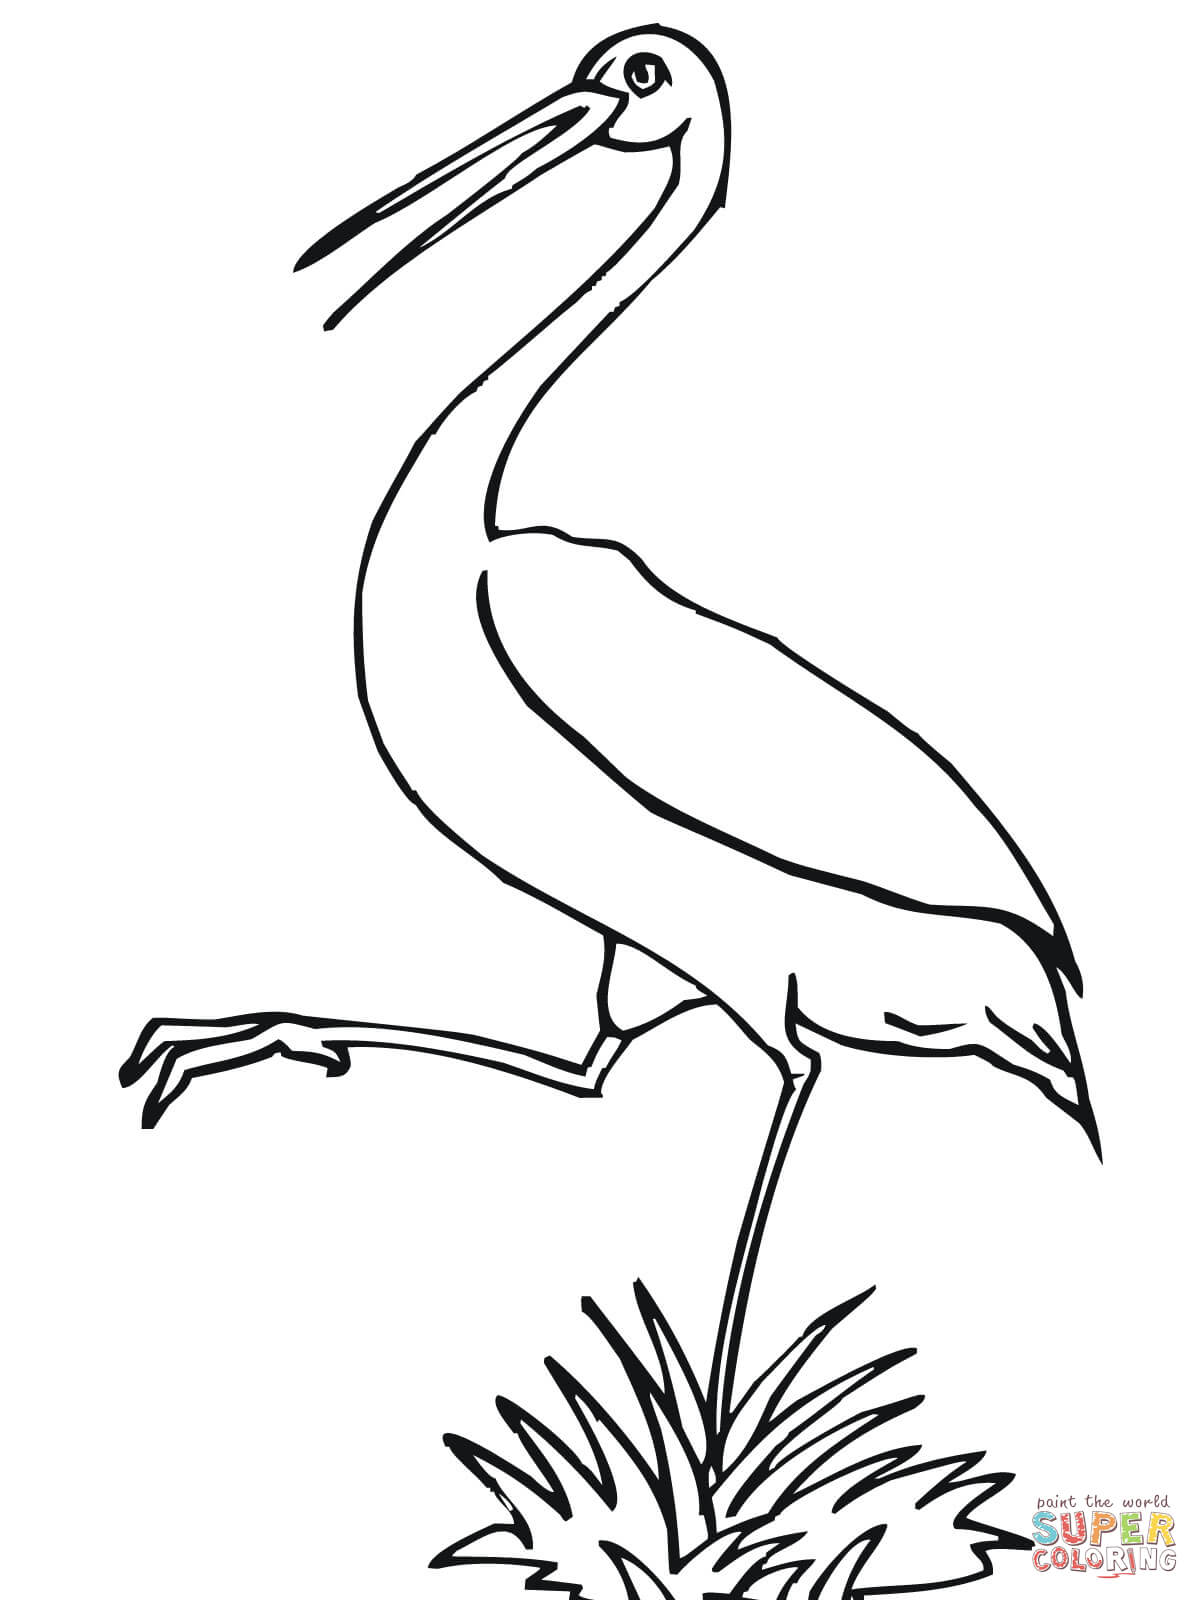 Stork coloring page free printable coloring pages